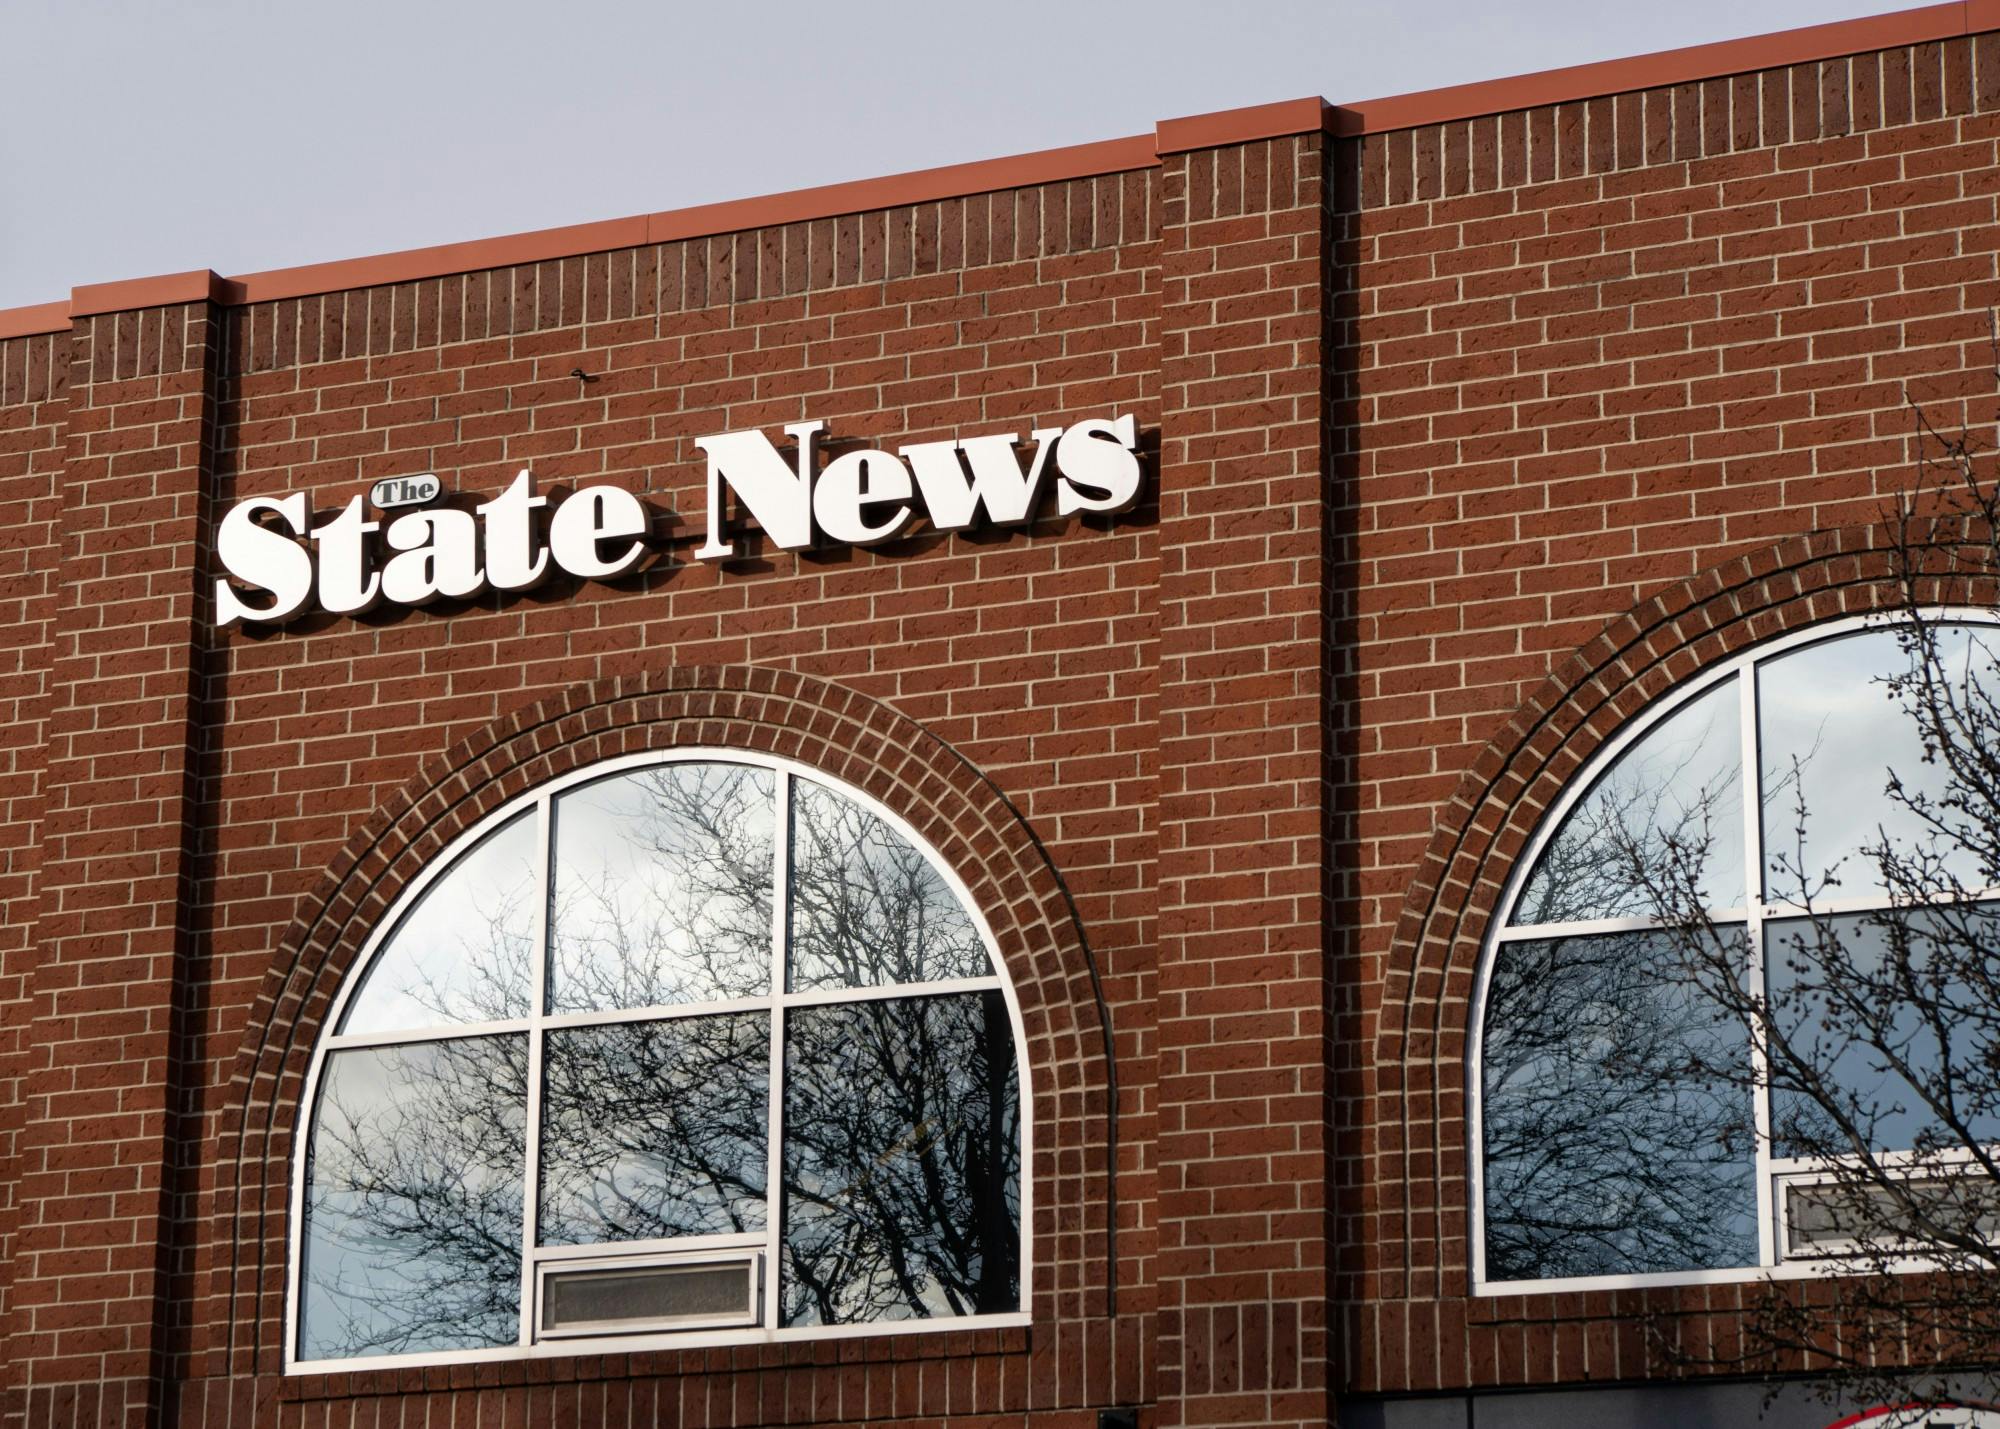 The State News building sign on Grand River Avenue.